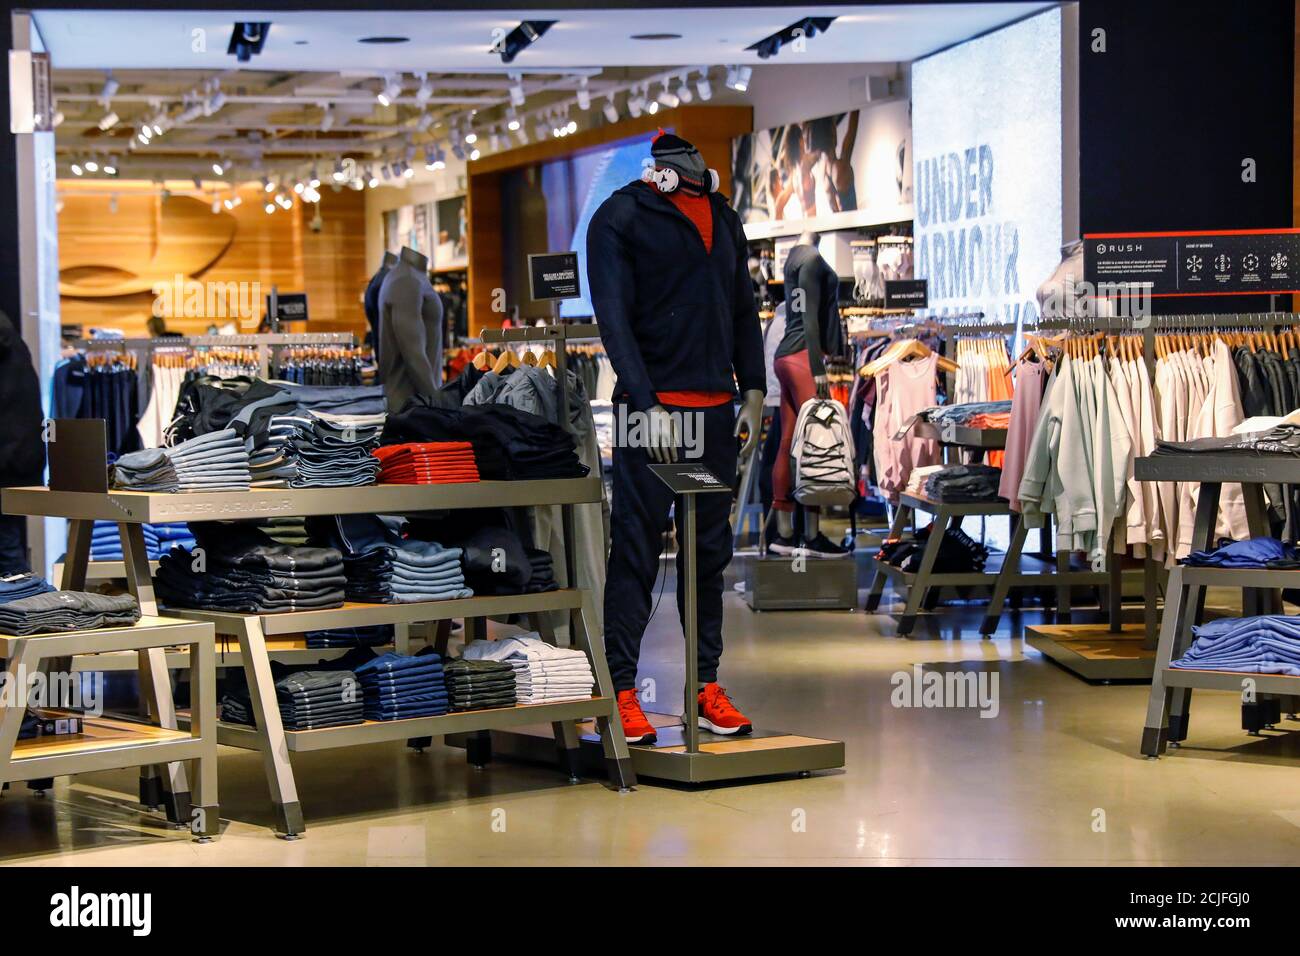 Products are displayed in an Under Armour store in New York City, U.S.,  November 4, 2019. REUTERS/Brendan McDermid Stock Photo - Alamy